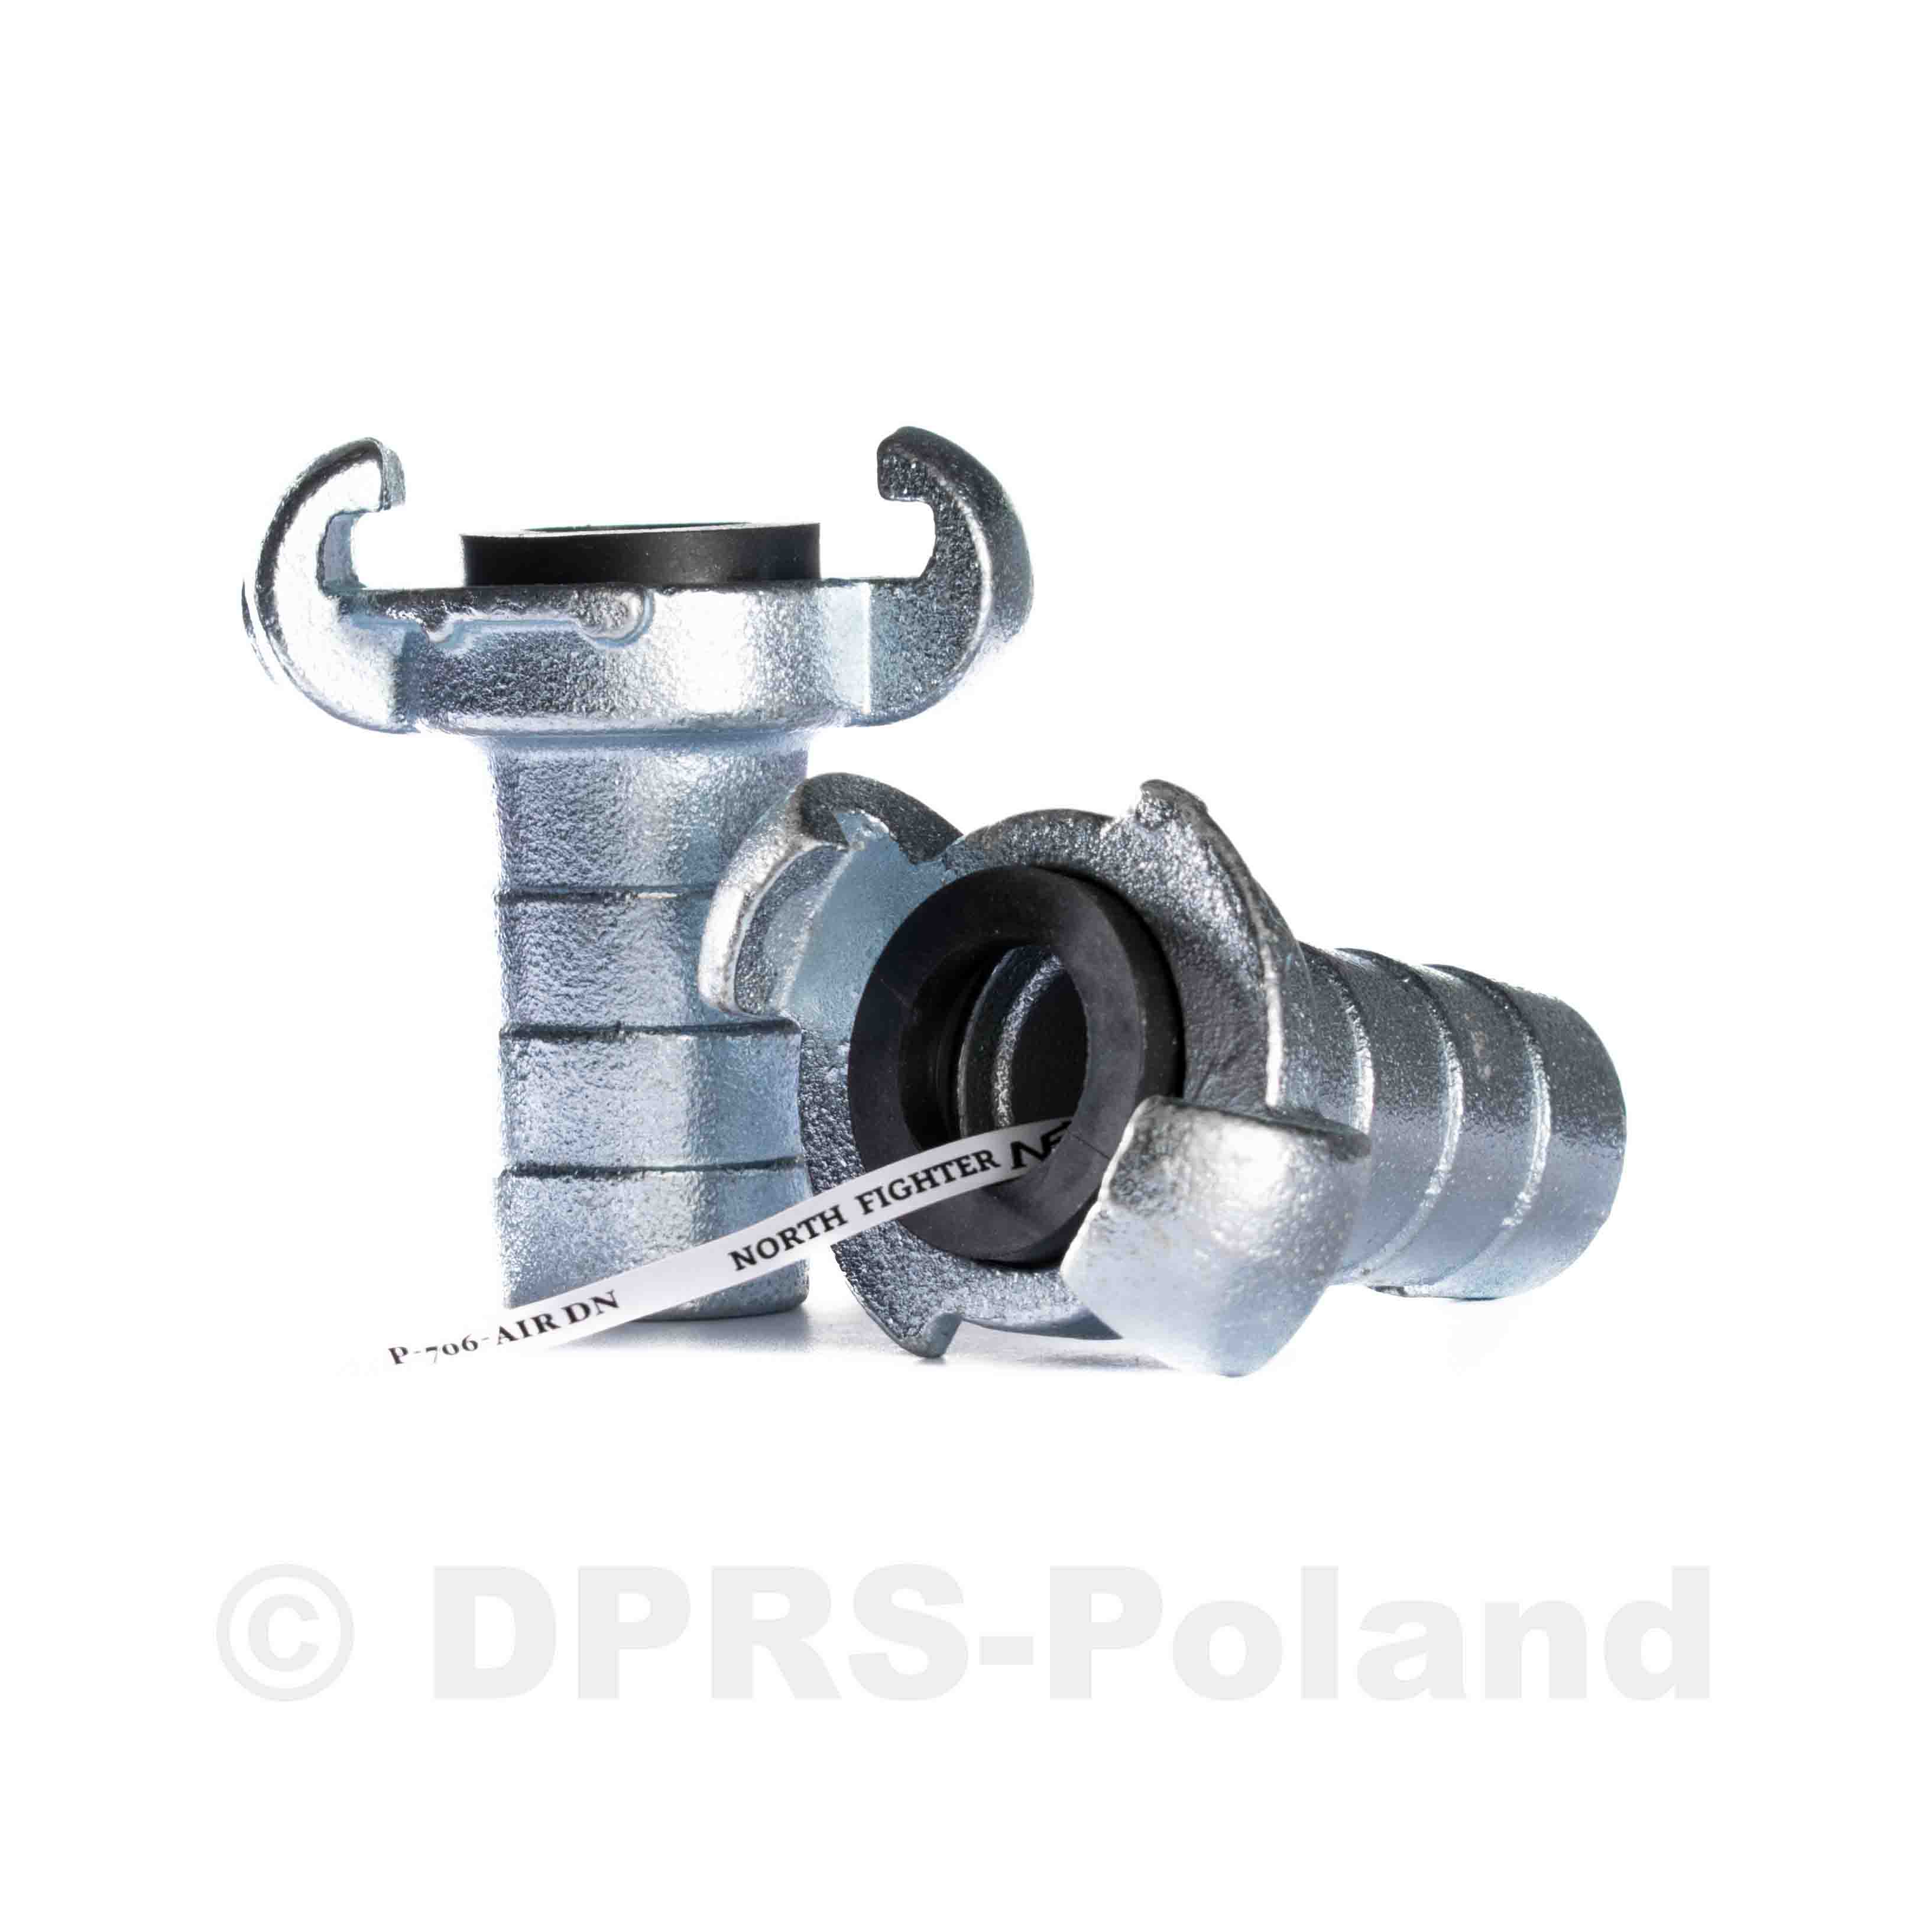 Hose adapter DIN 3483/3489 NORTH FIGHTER - DPRS